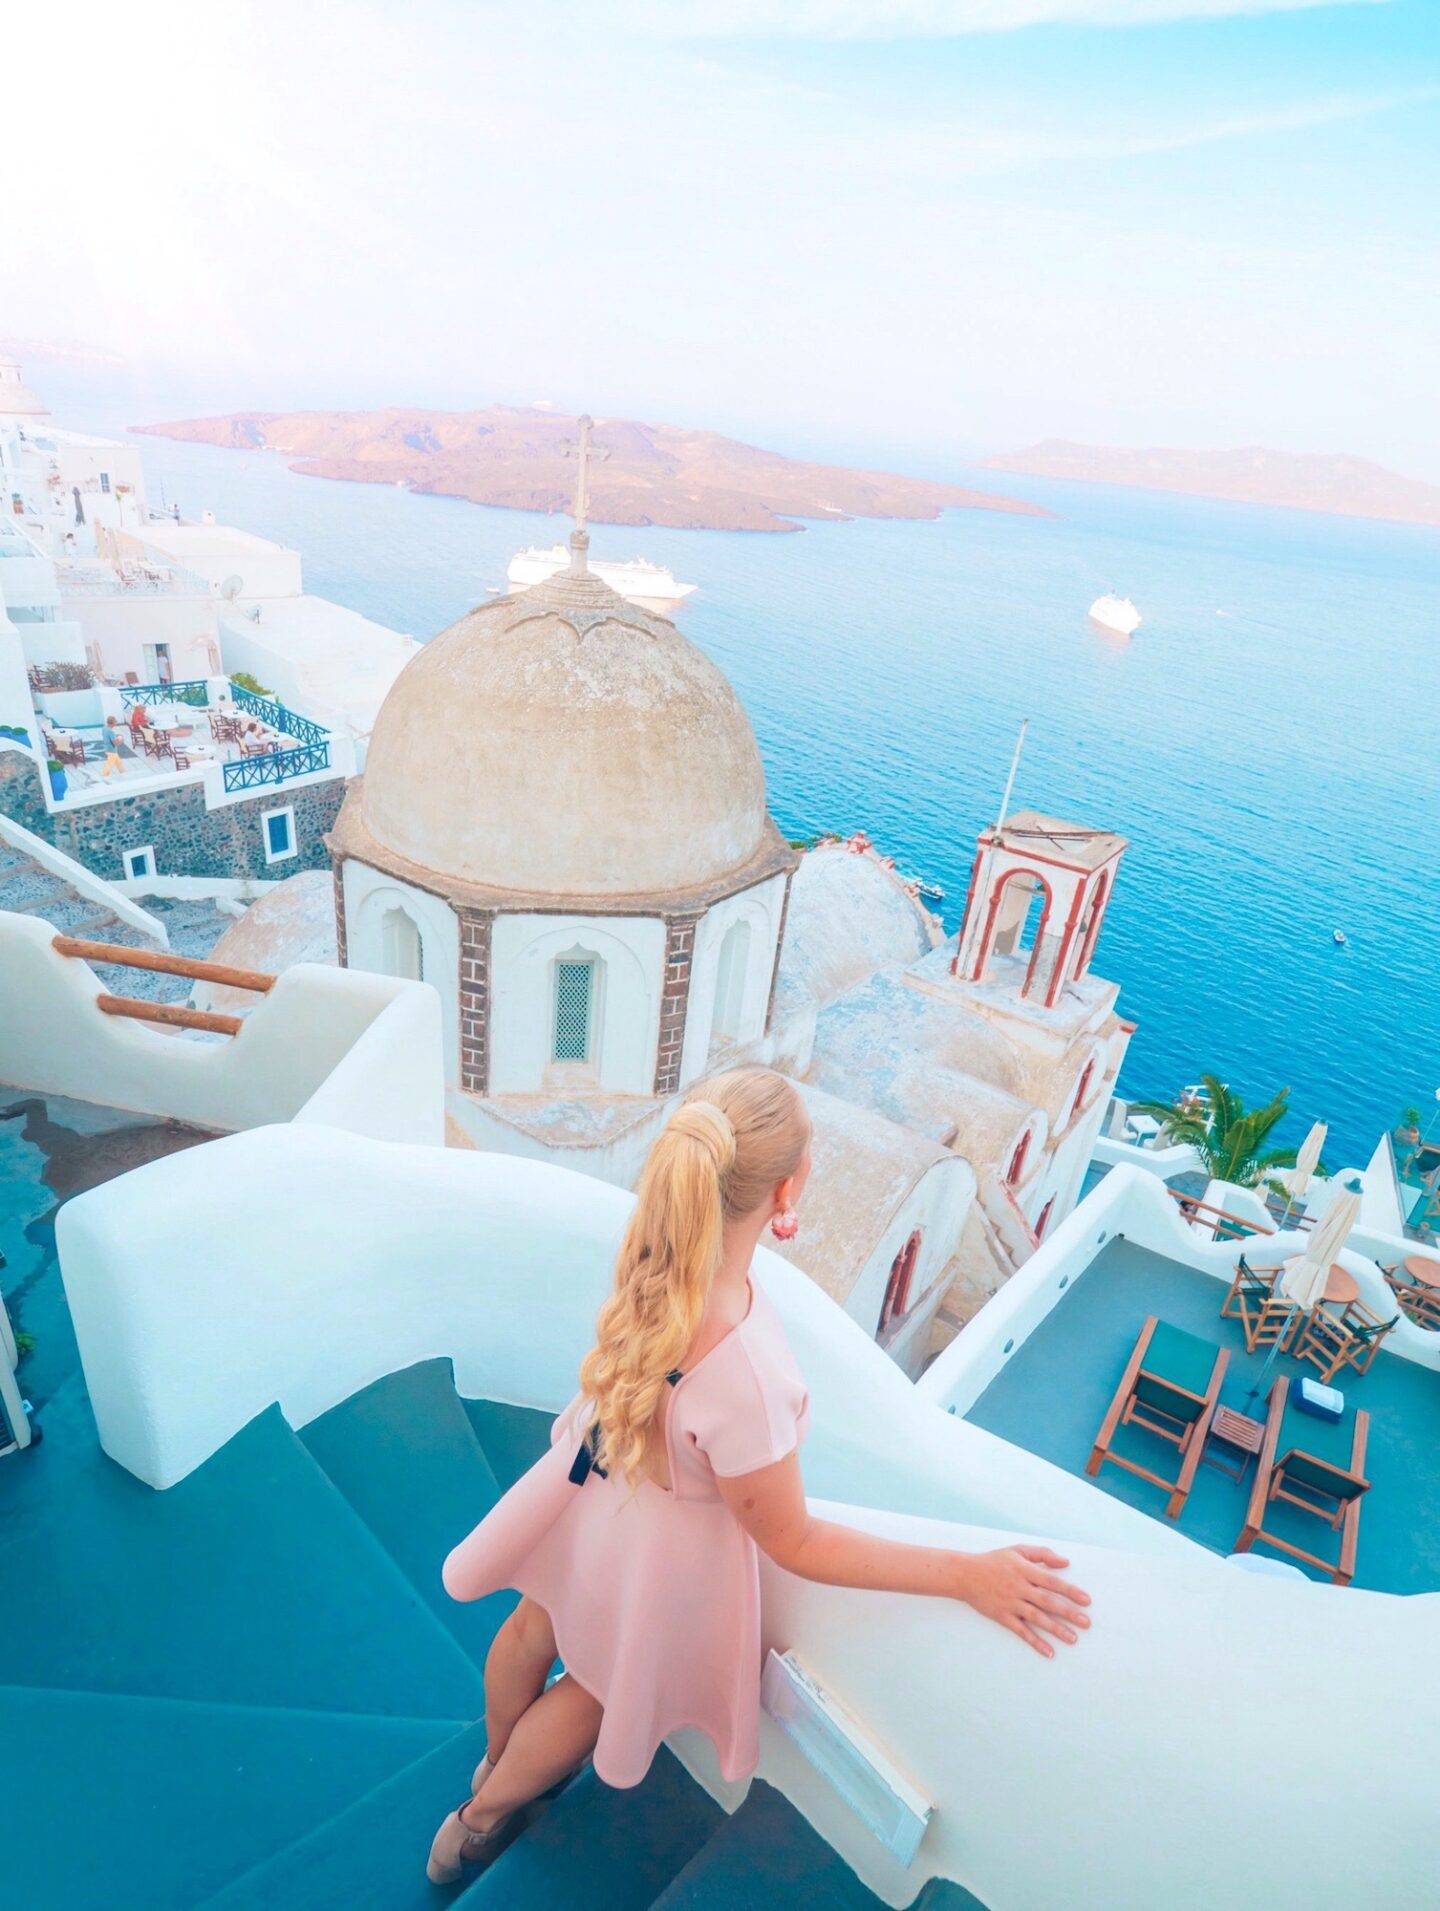 The best photo spots and most instagrammable places in Santorini: Church of St.John the Theologian in Fira. Click the photo to see the rest of my list of the best instagram photo spots in Santorini!